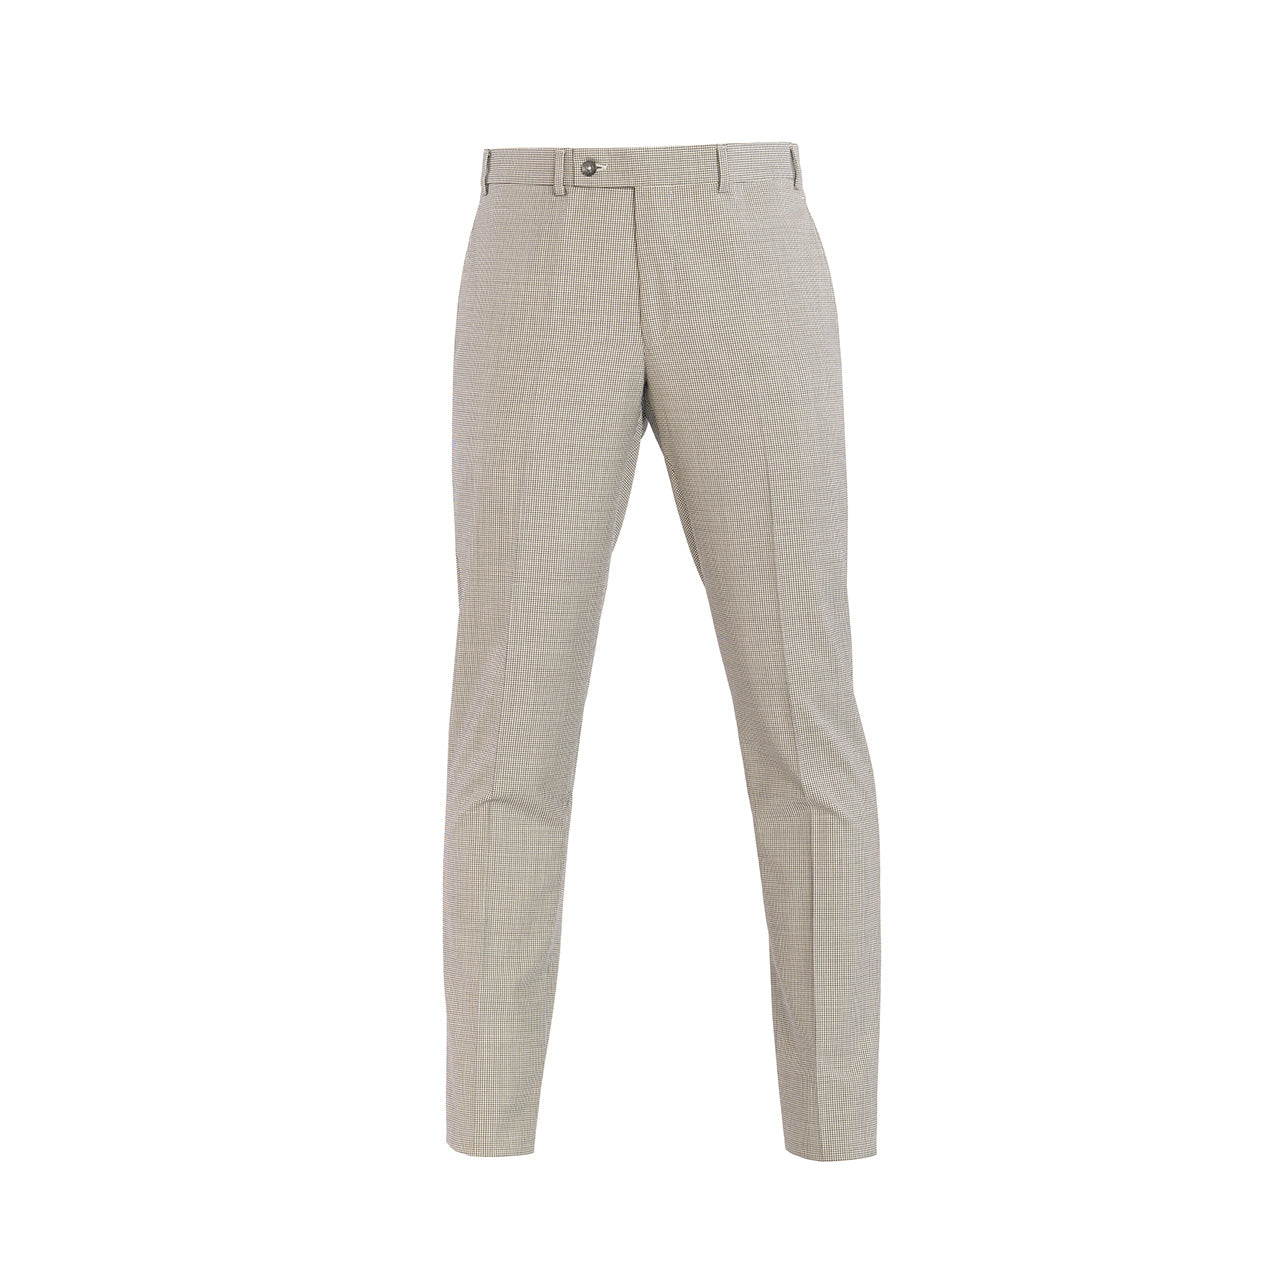 Lennox Dress Pants in Puppy Tooth